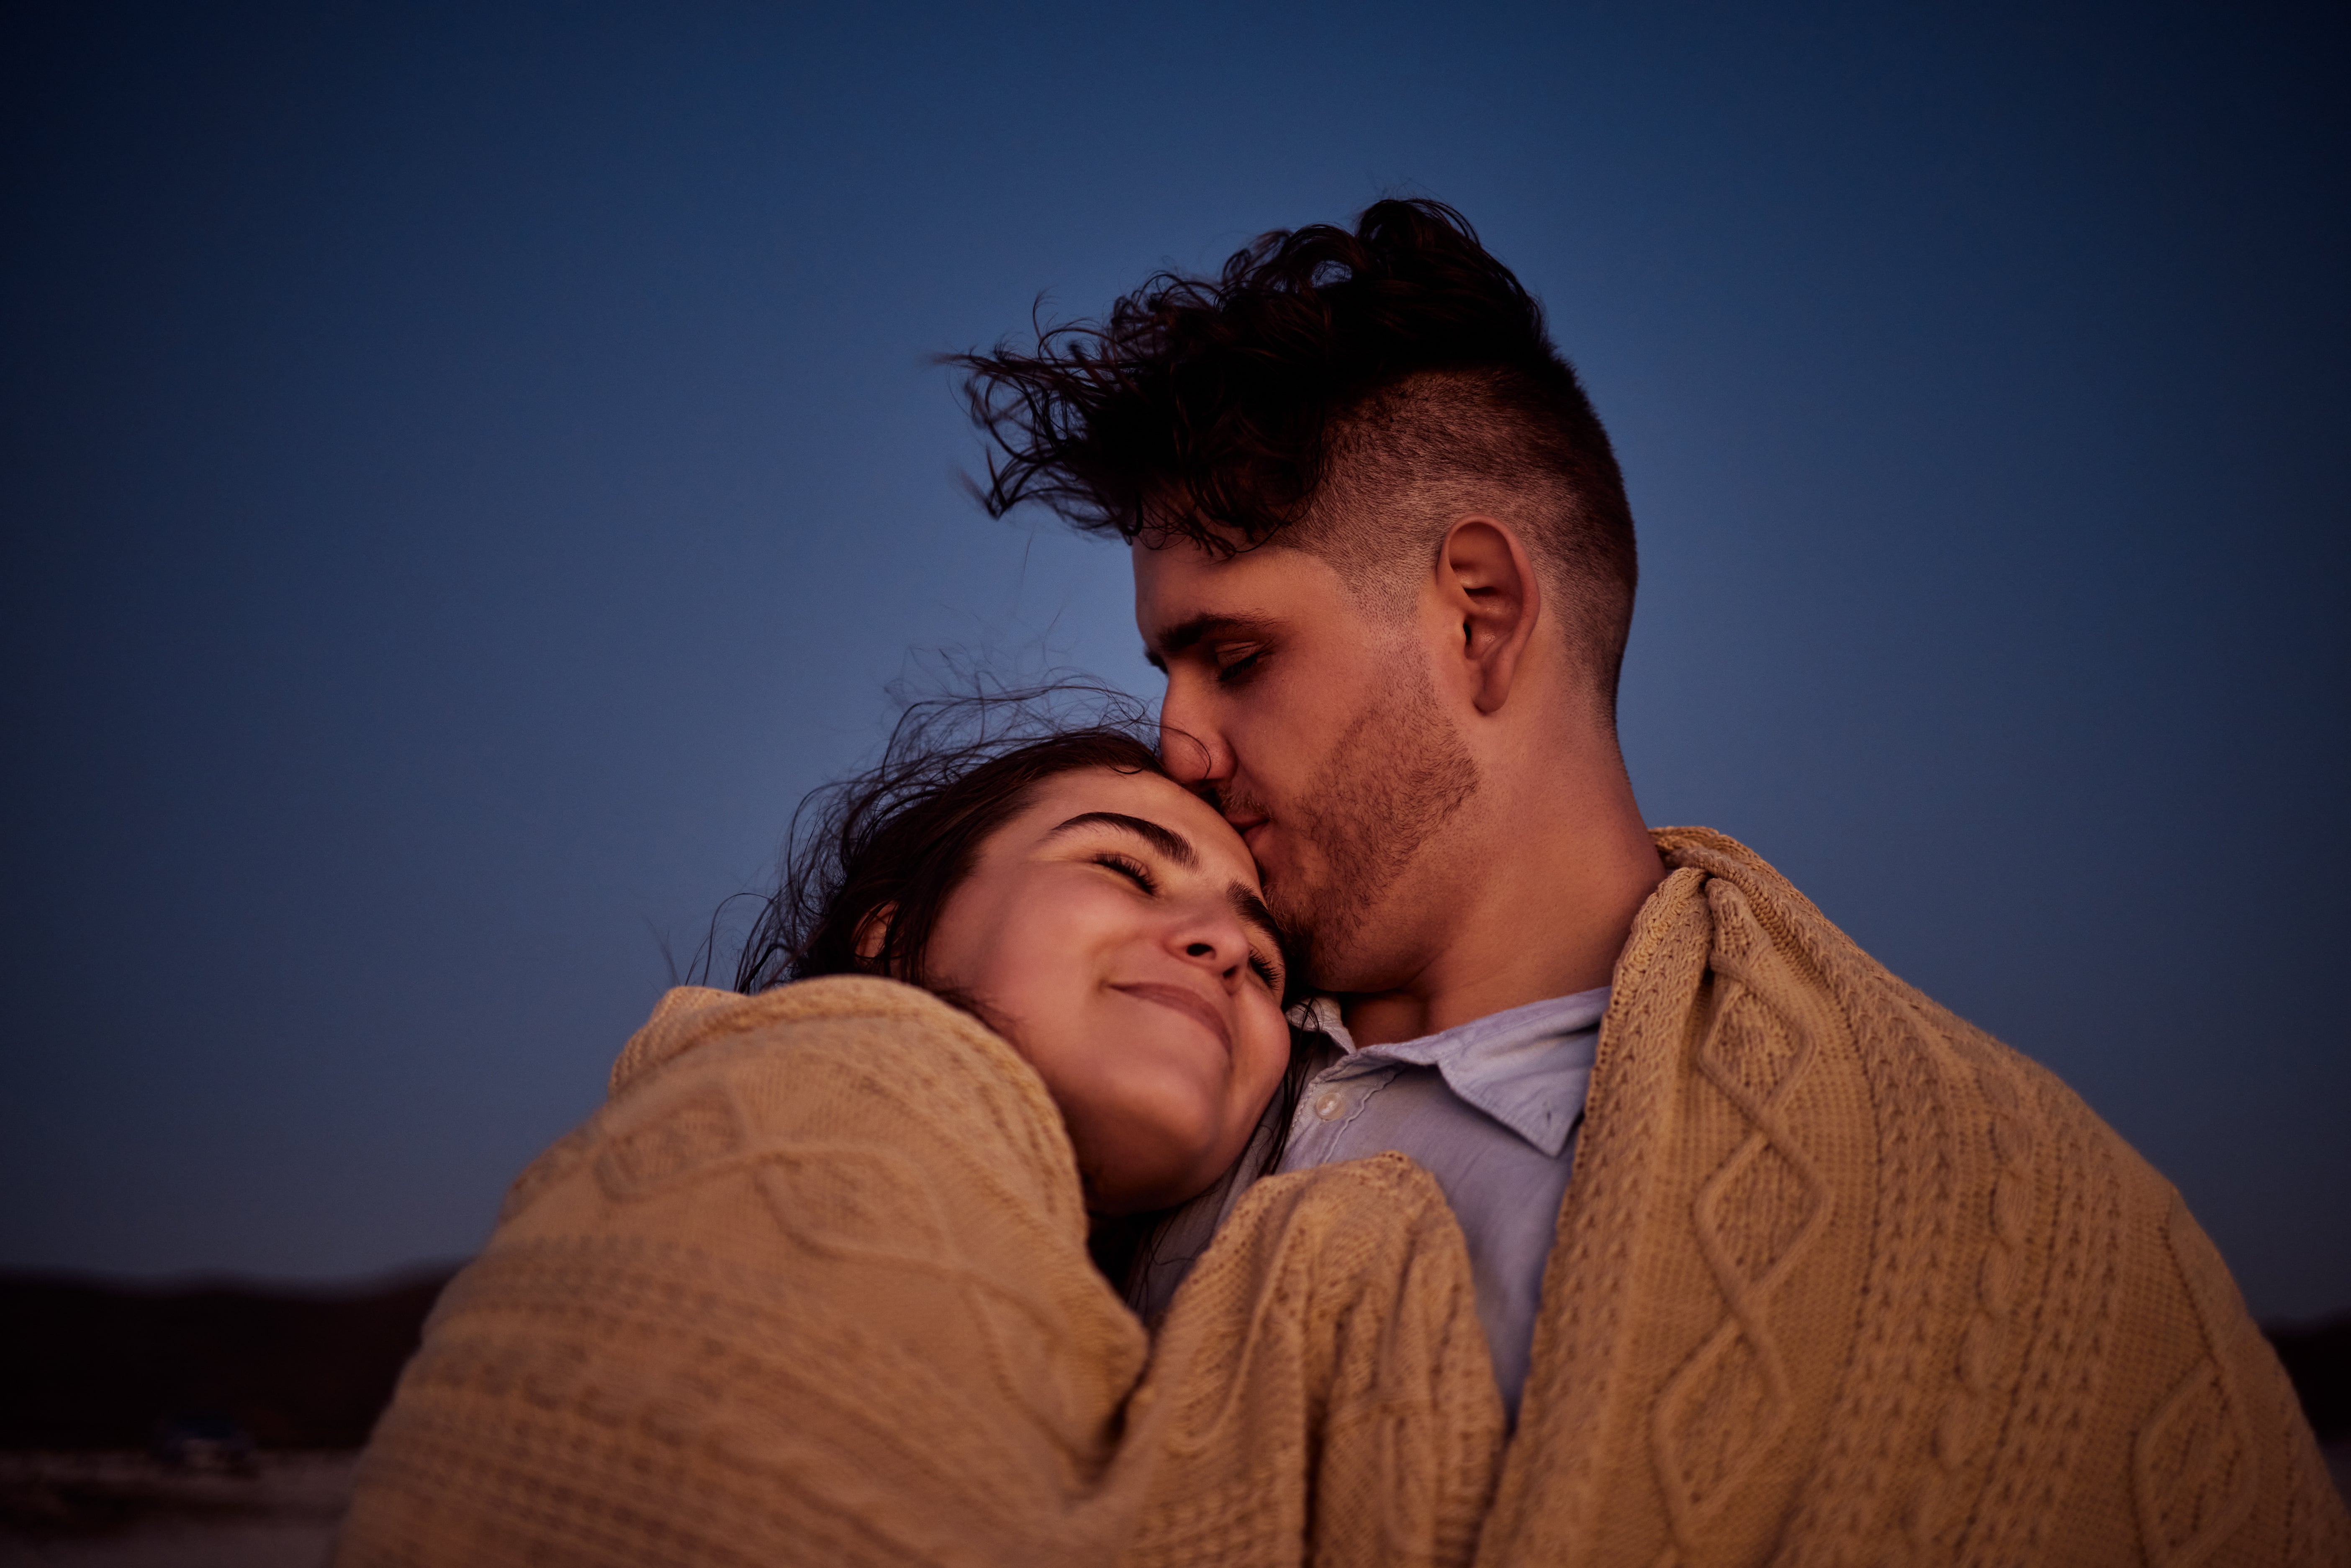 A couple embracing, wrapped in a blanket big enough for two as they star gaze outdoors.